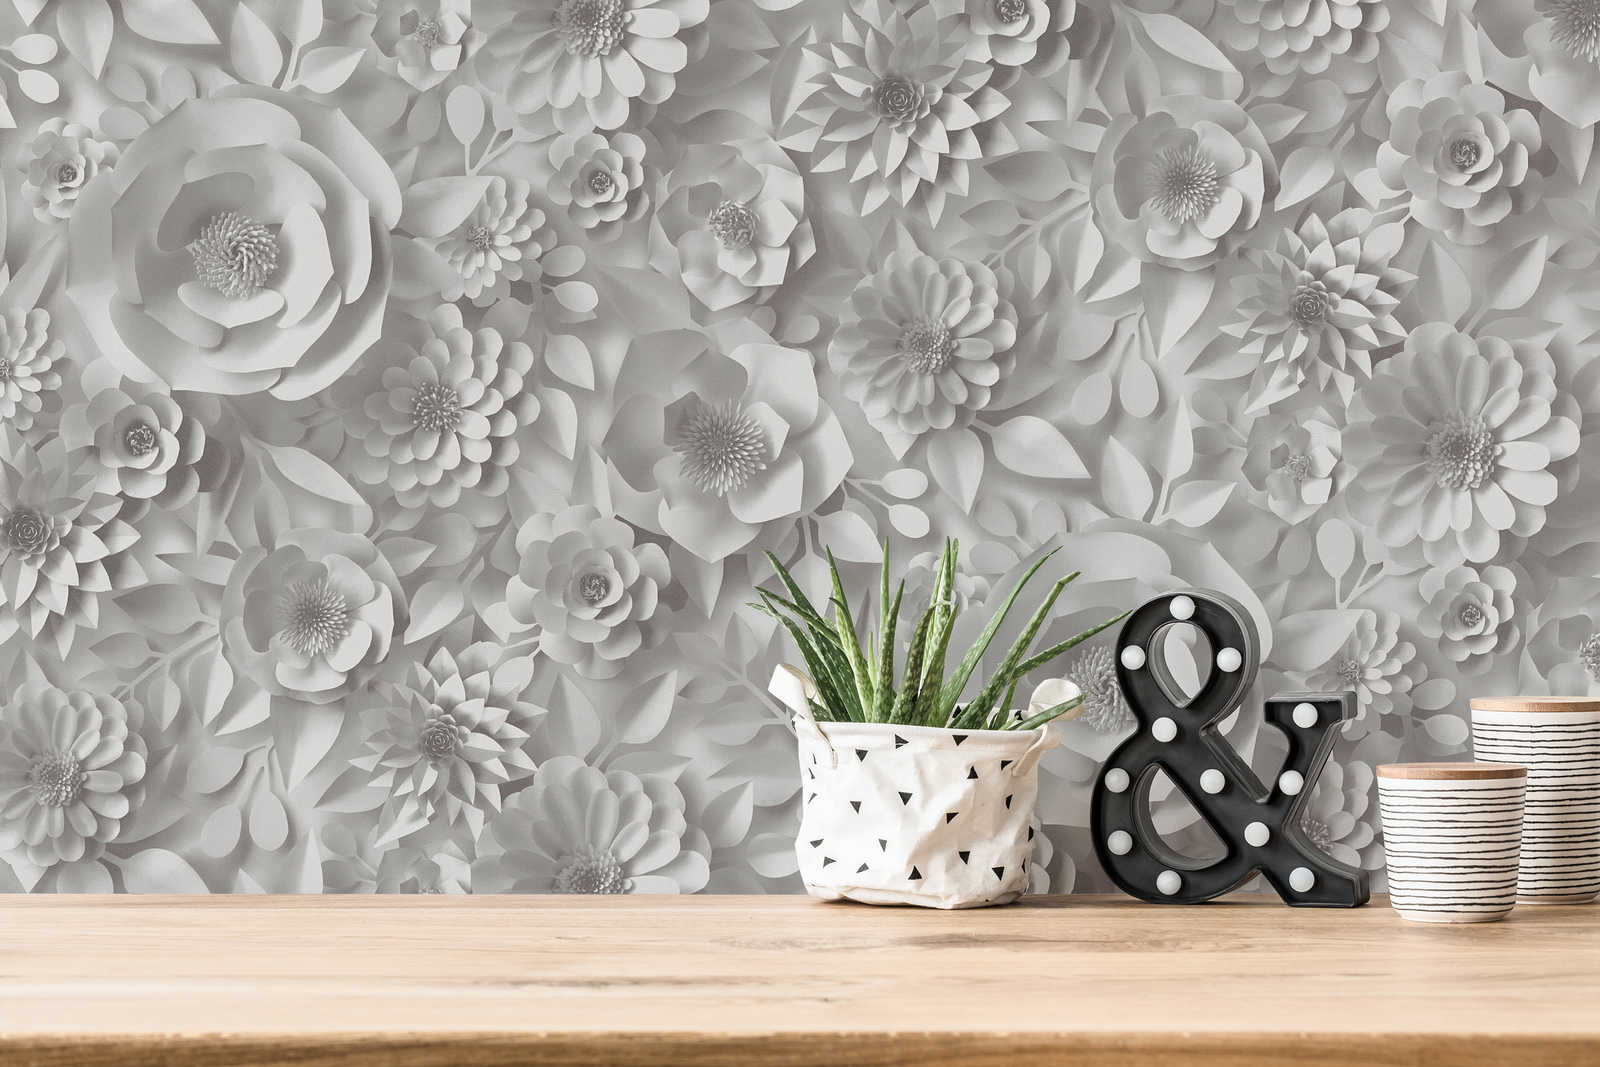             3D wallpaper with paper flowers, graphic floral pattern - white
        